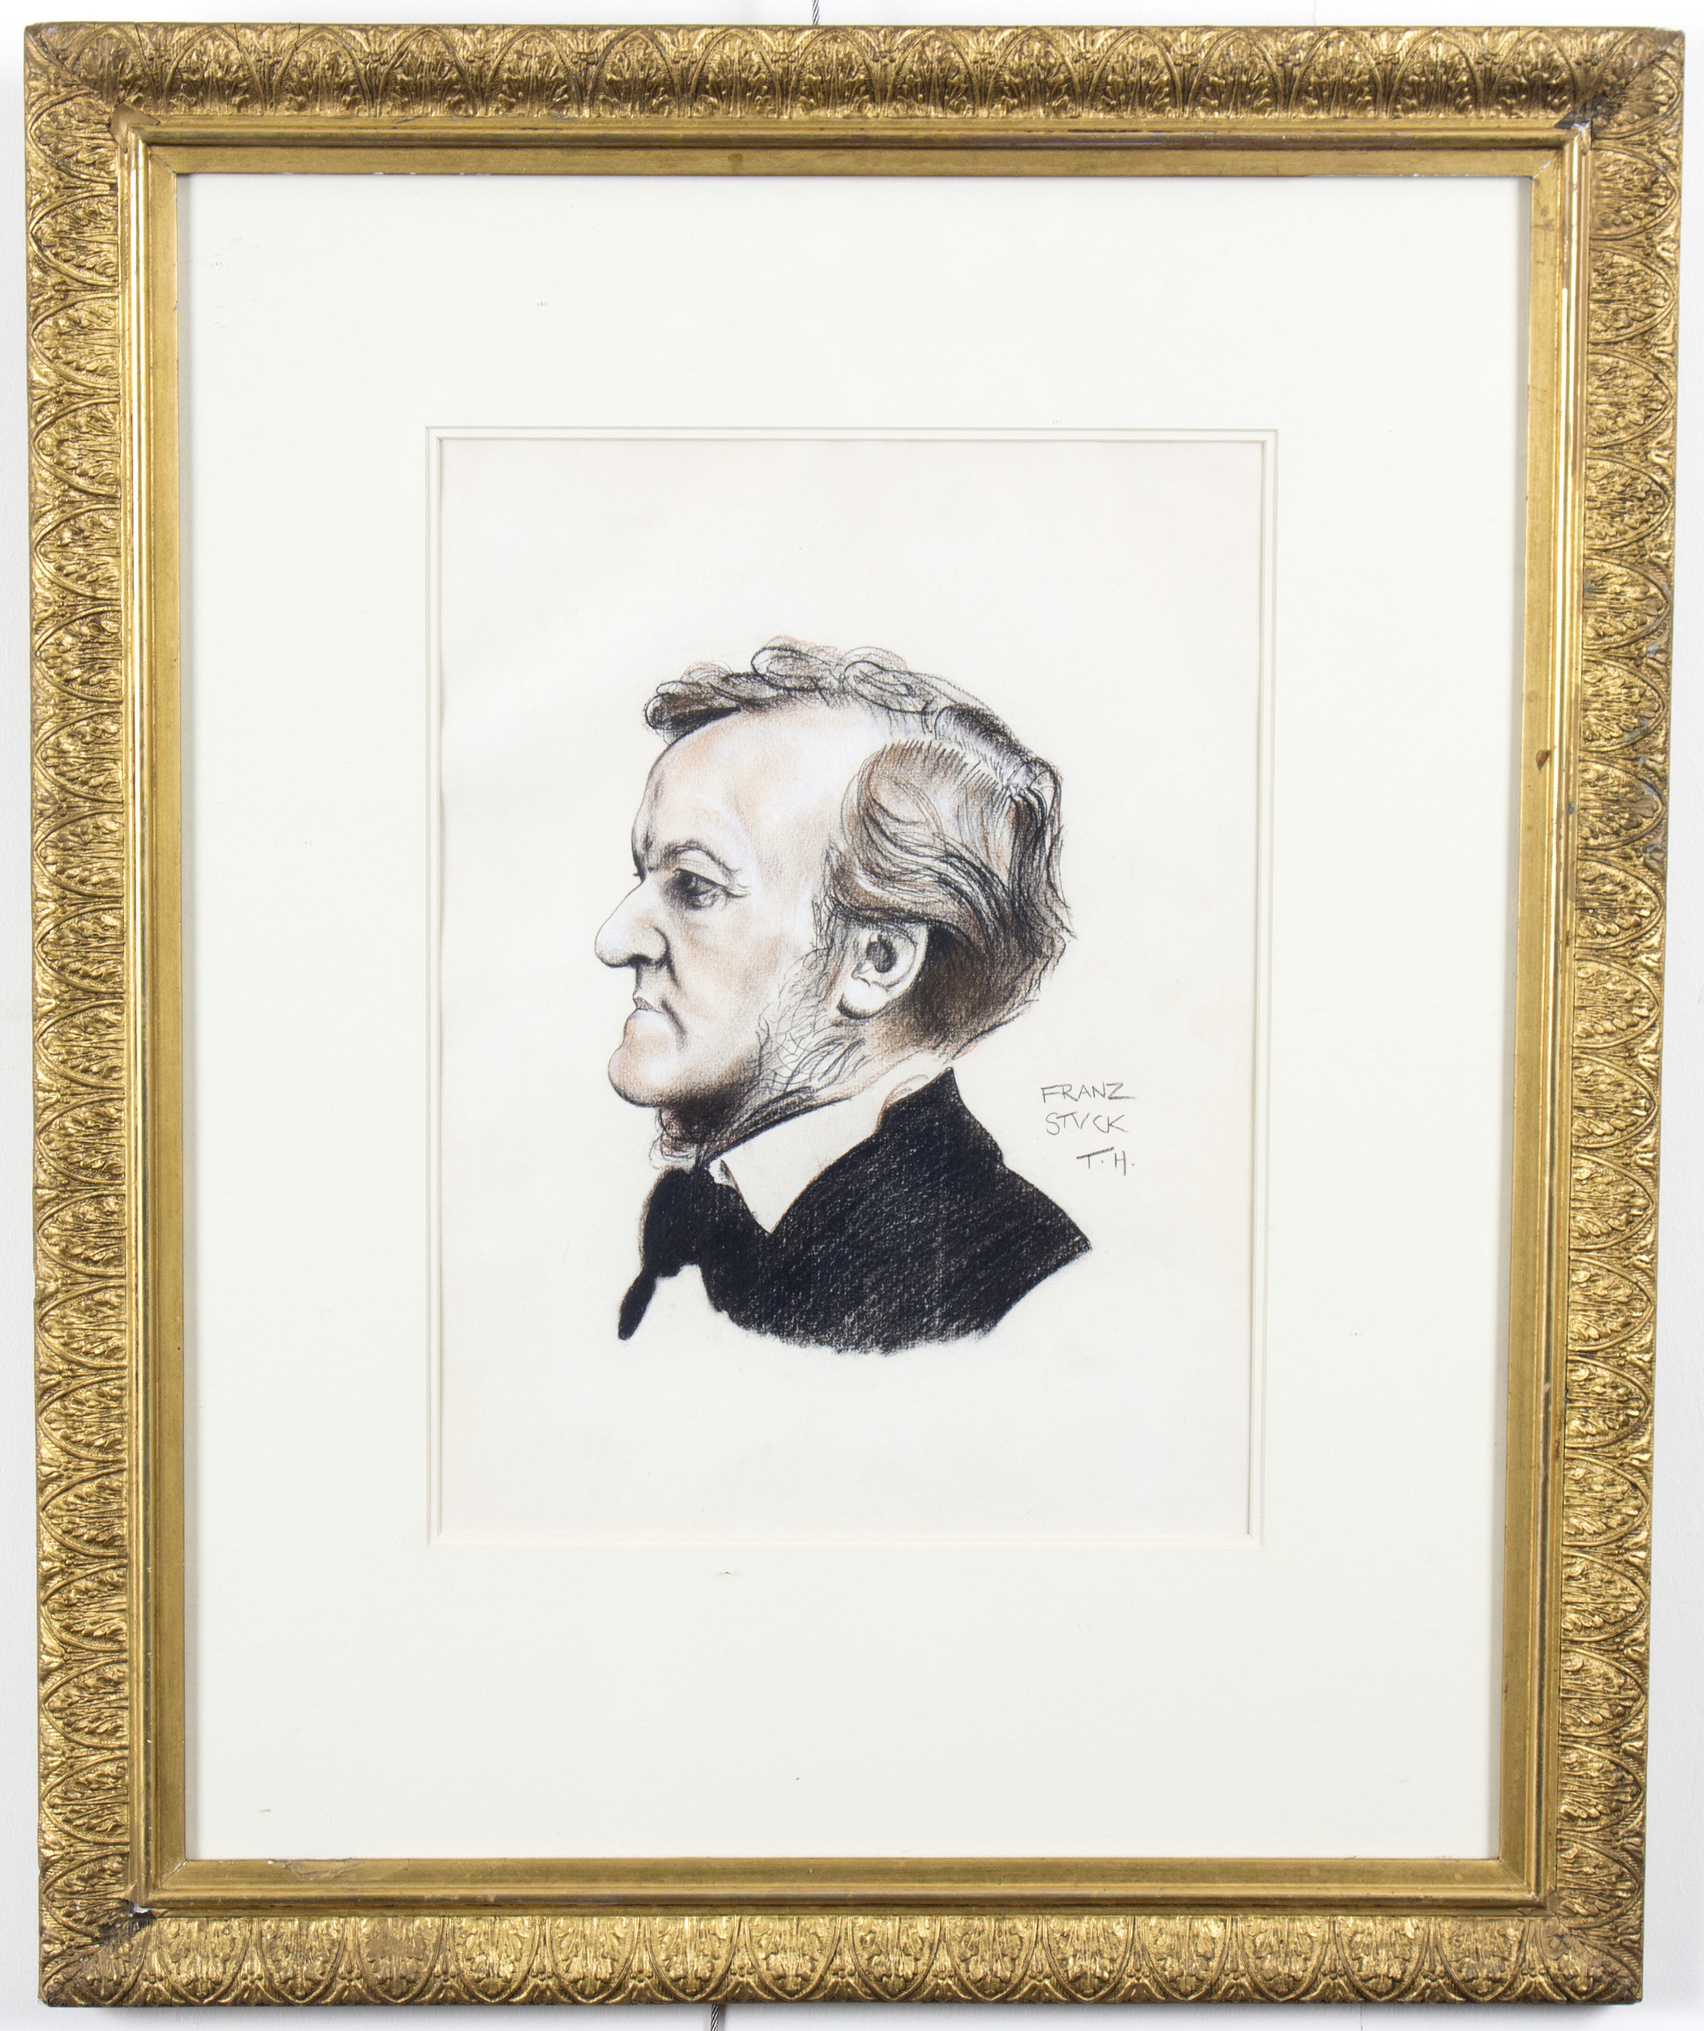 Timothy J Howard (20th Century) after Stuck/Portrait of Richard Wagner/bearing signature Franx - Image 3 of 4